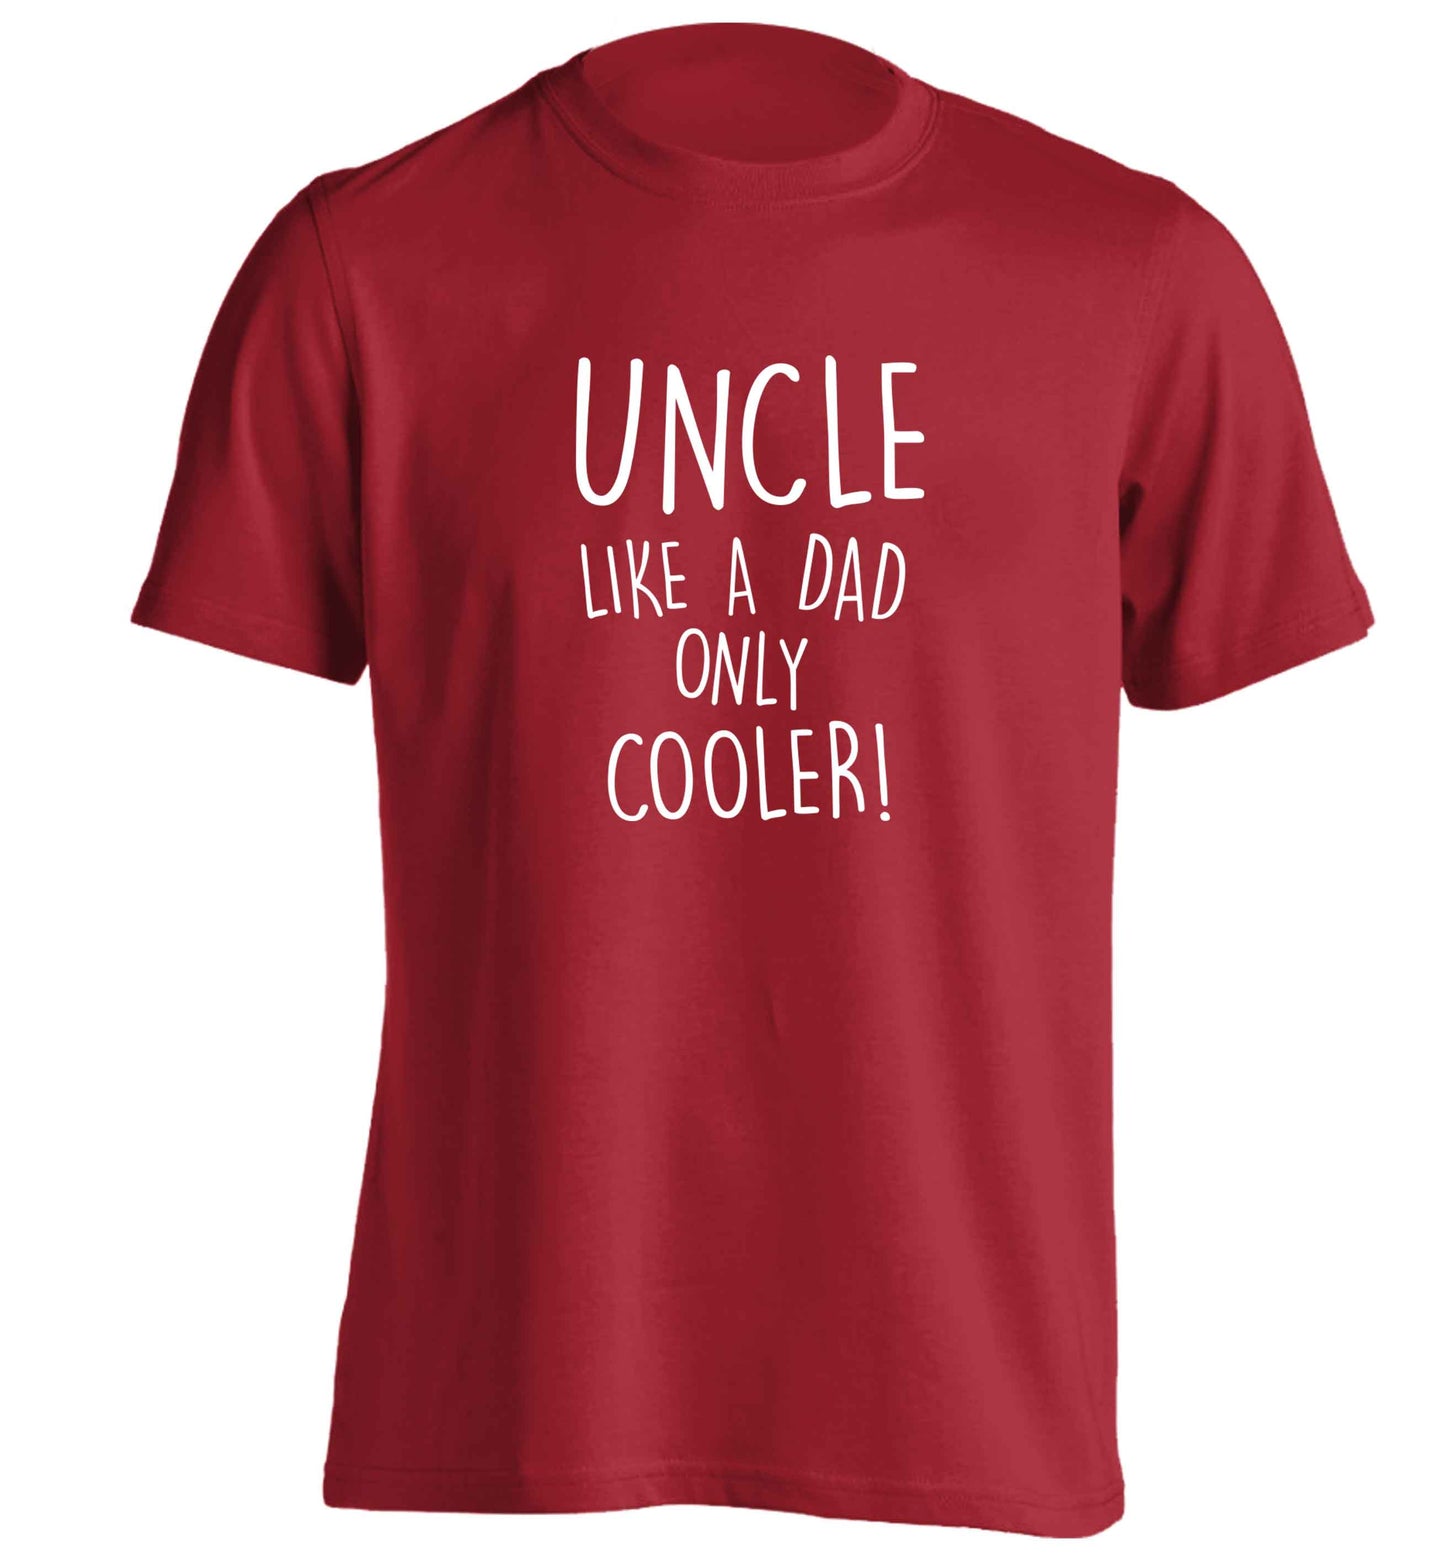 Uncle like a dad only cooler adults unisex red Tshirt 2XL